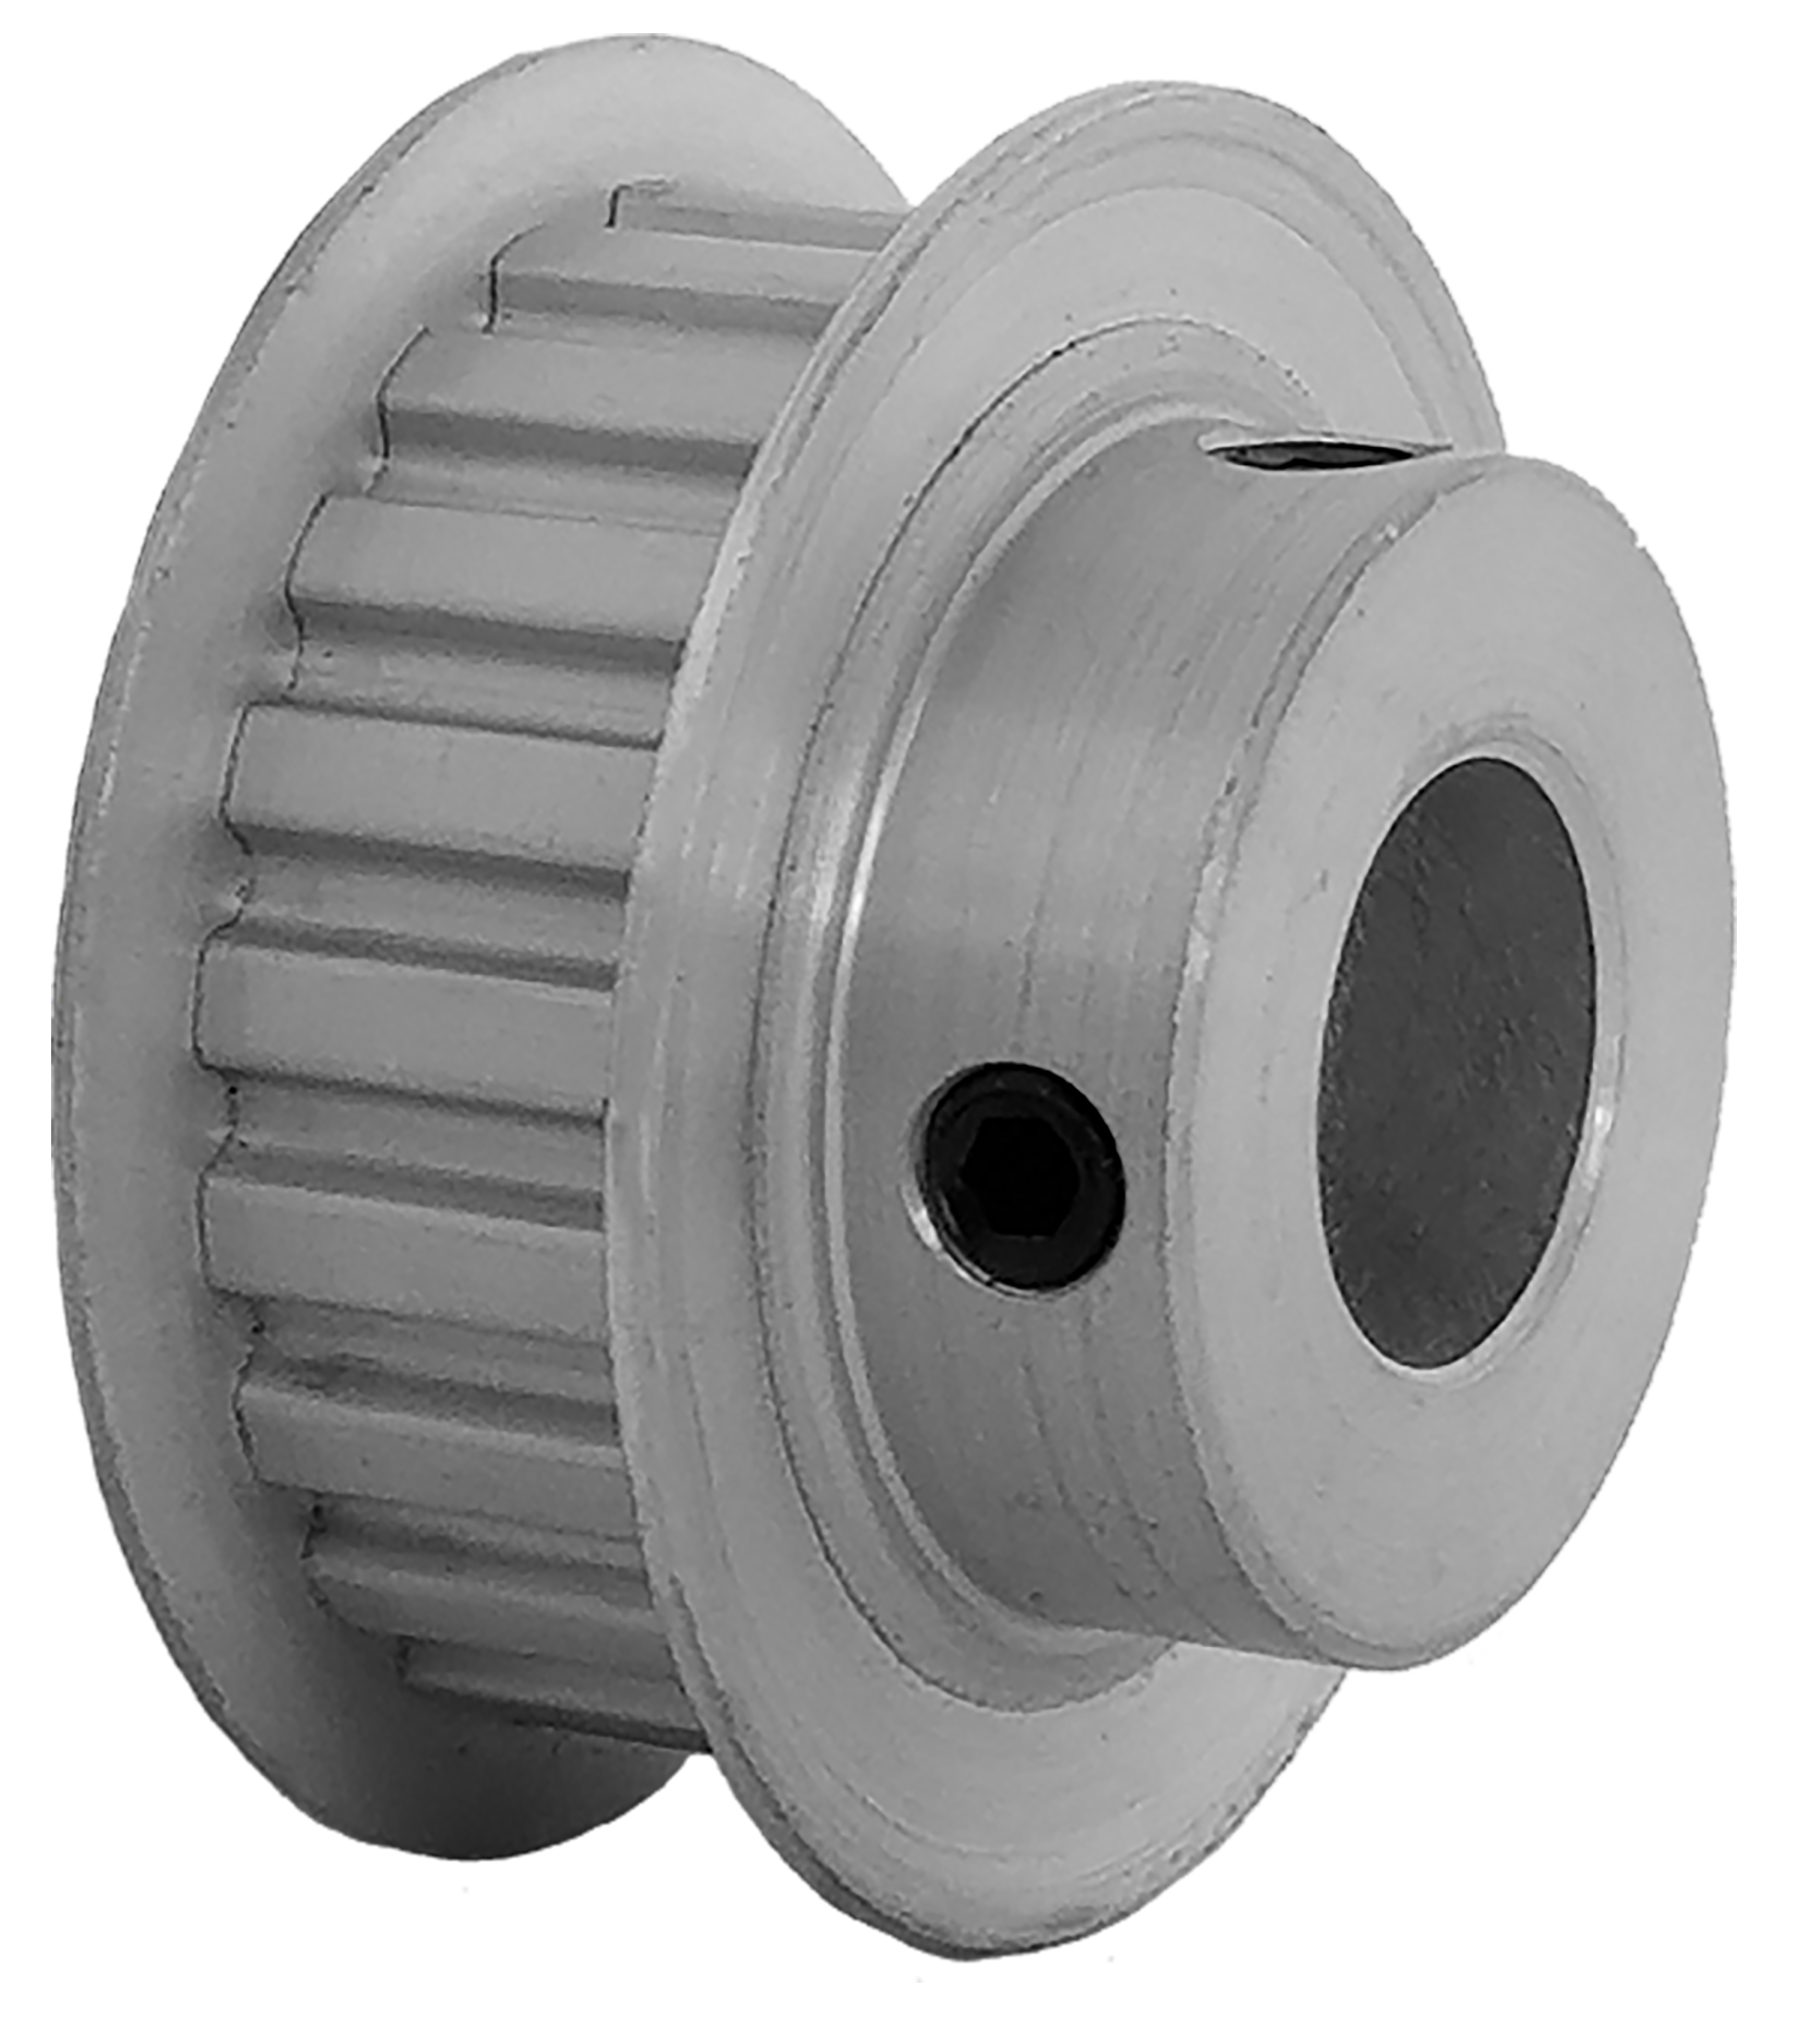 21XL037-6FA6 - Aluminum Imperial Pitch Pulleys